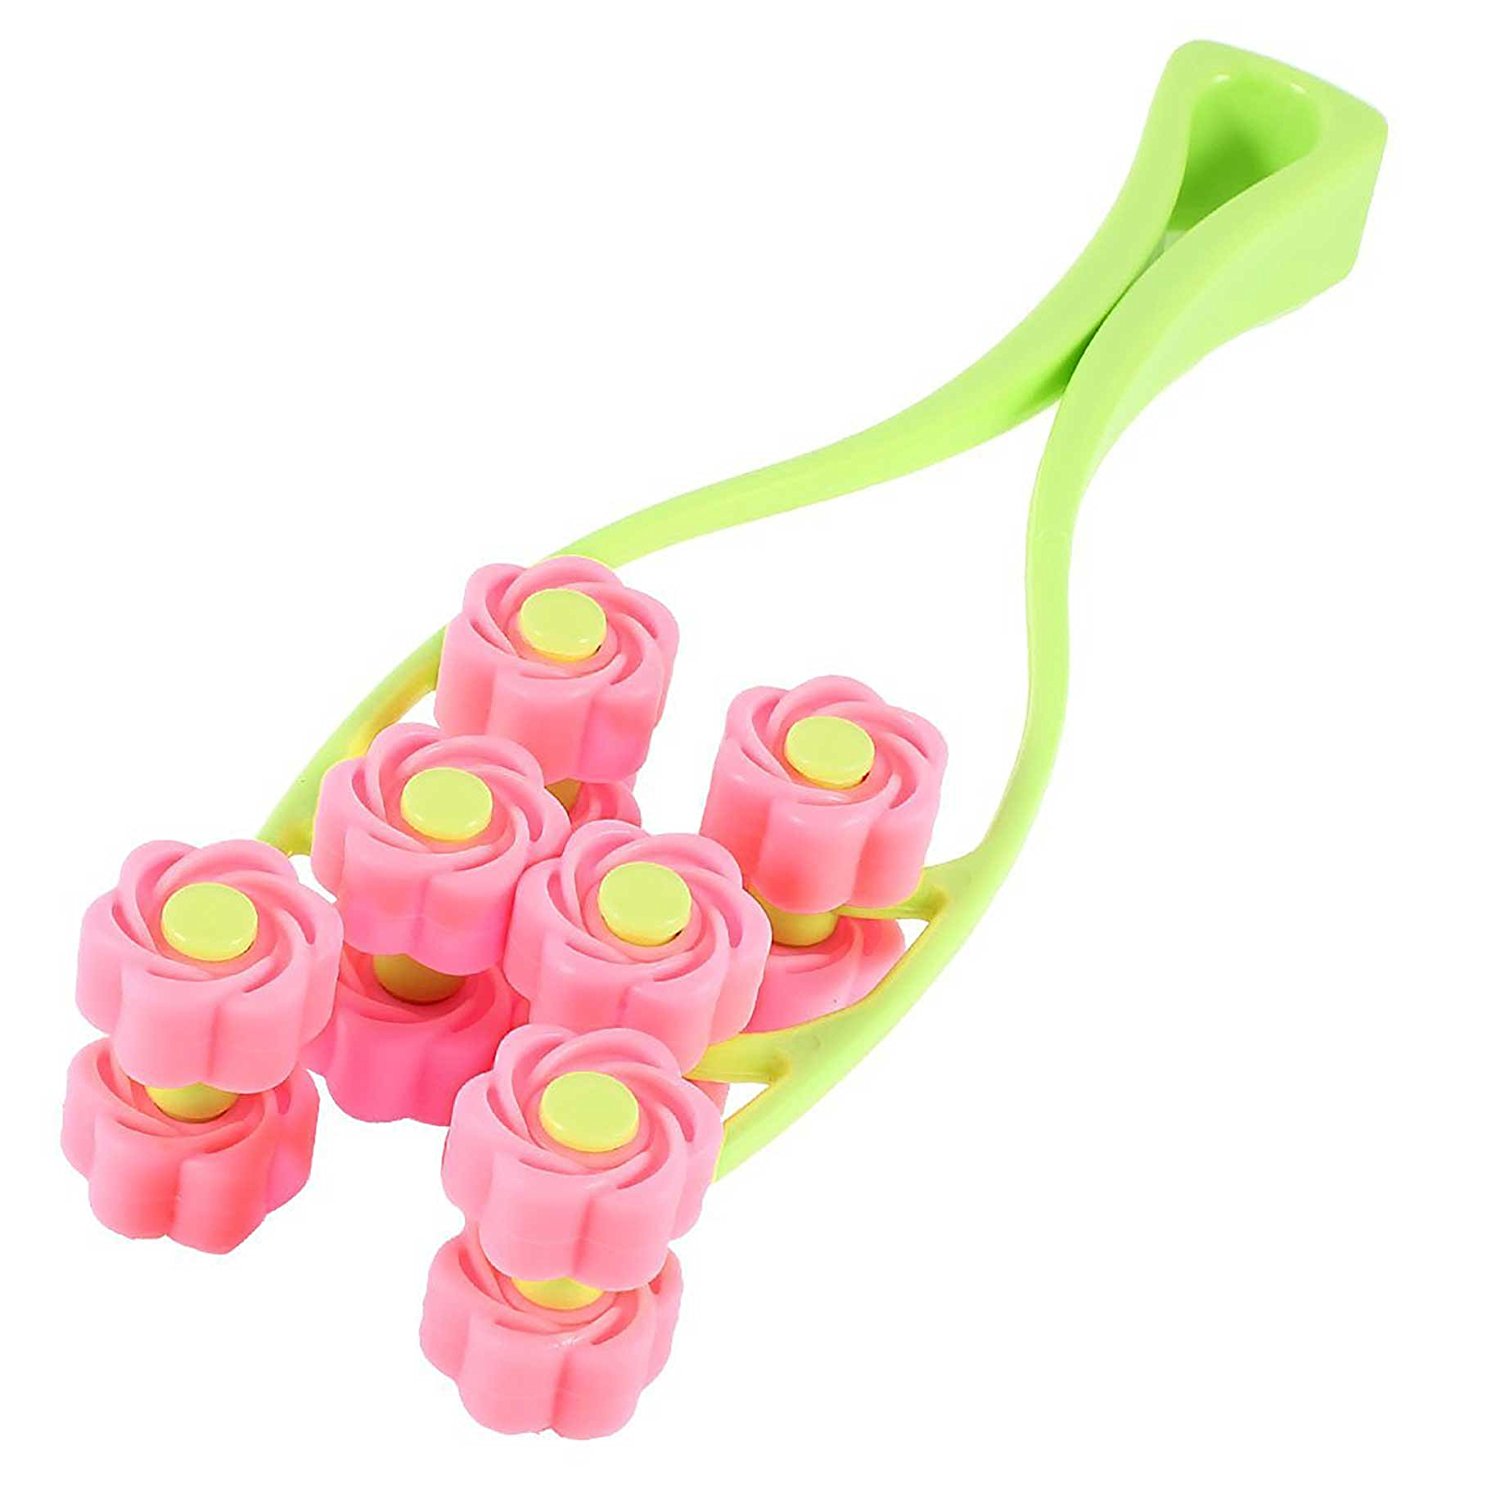 GHK H35 Face Lifter Roller Massager for Skin Toning (Multi-colour)